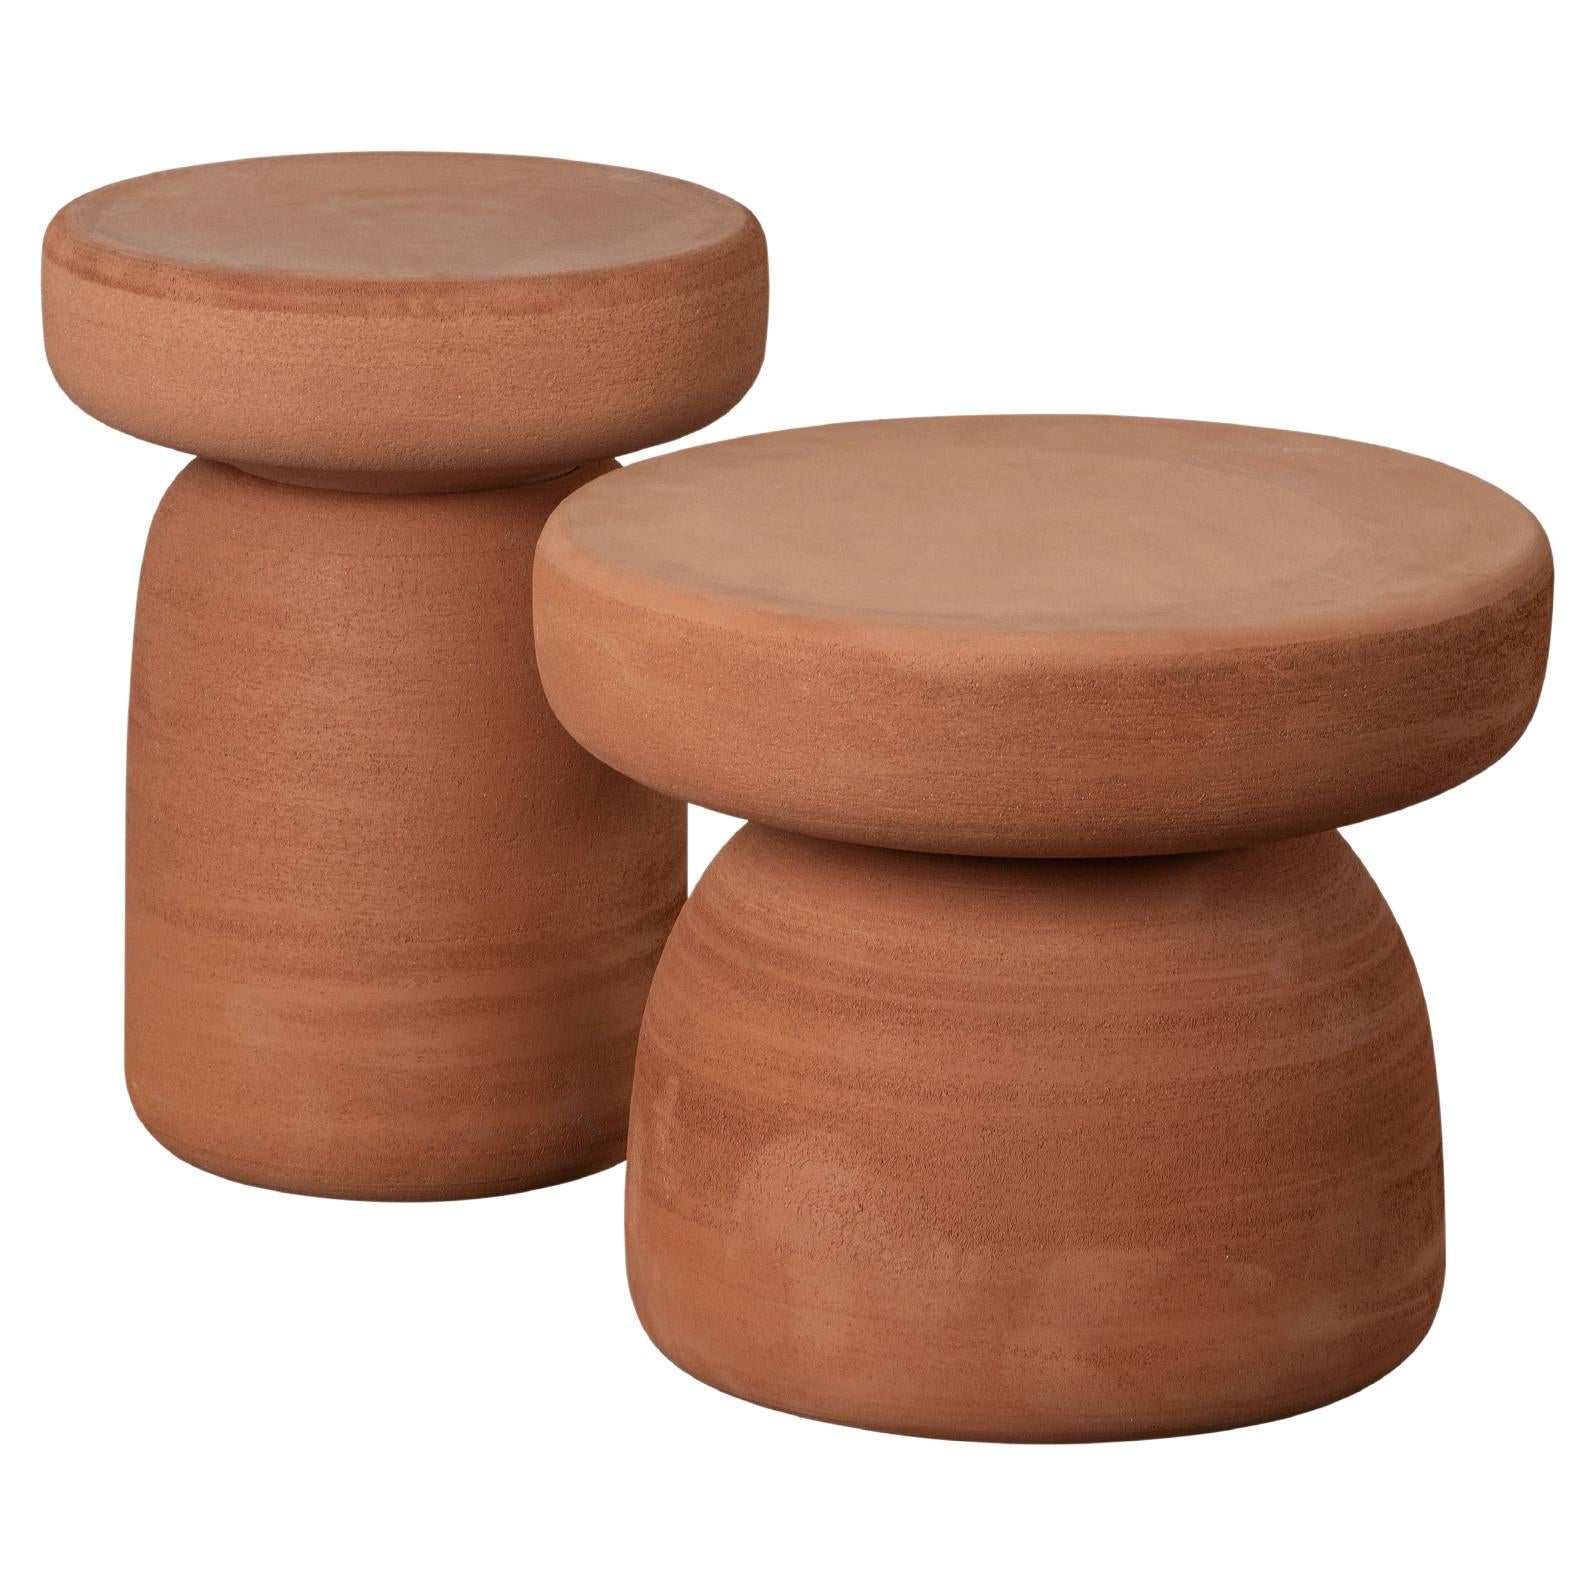 Tototo' Coffee Table in Hard Rock Terracotta by Paolo Cappello and Simone Sabati